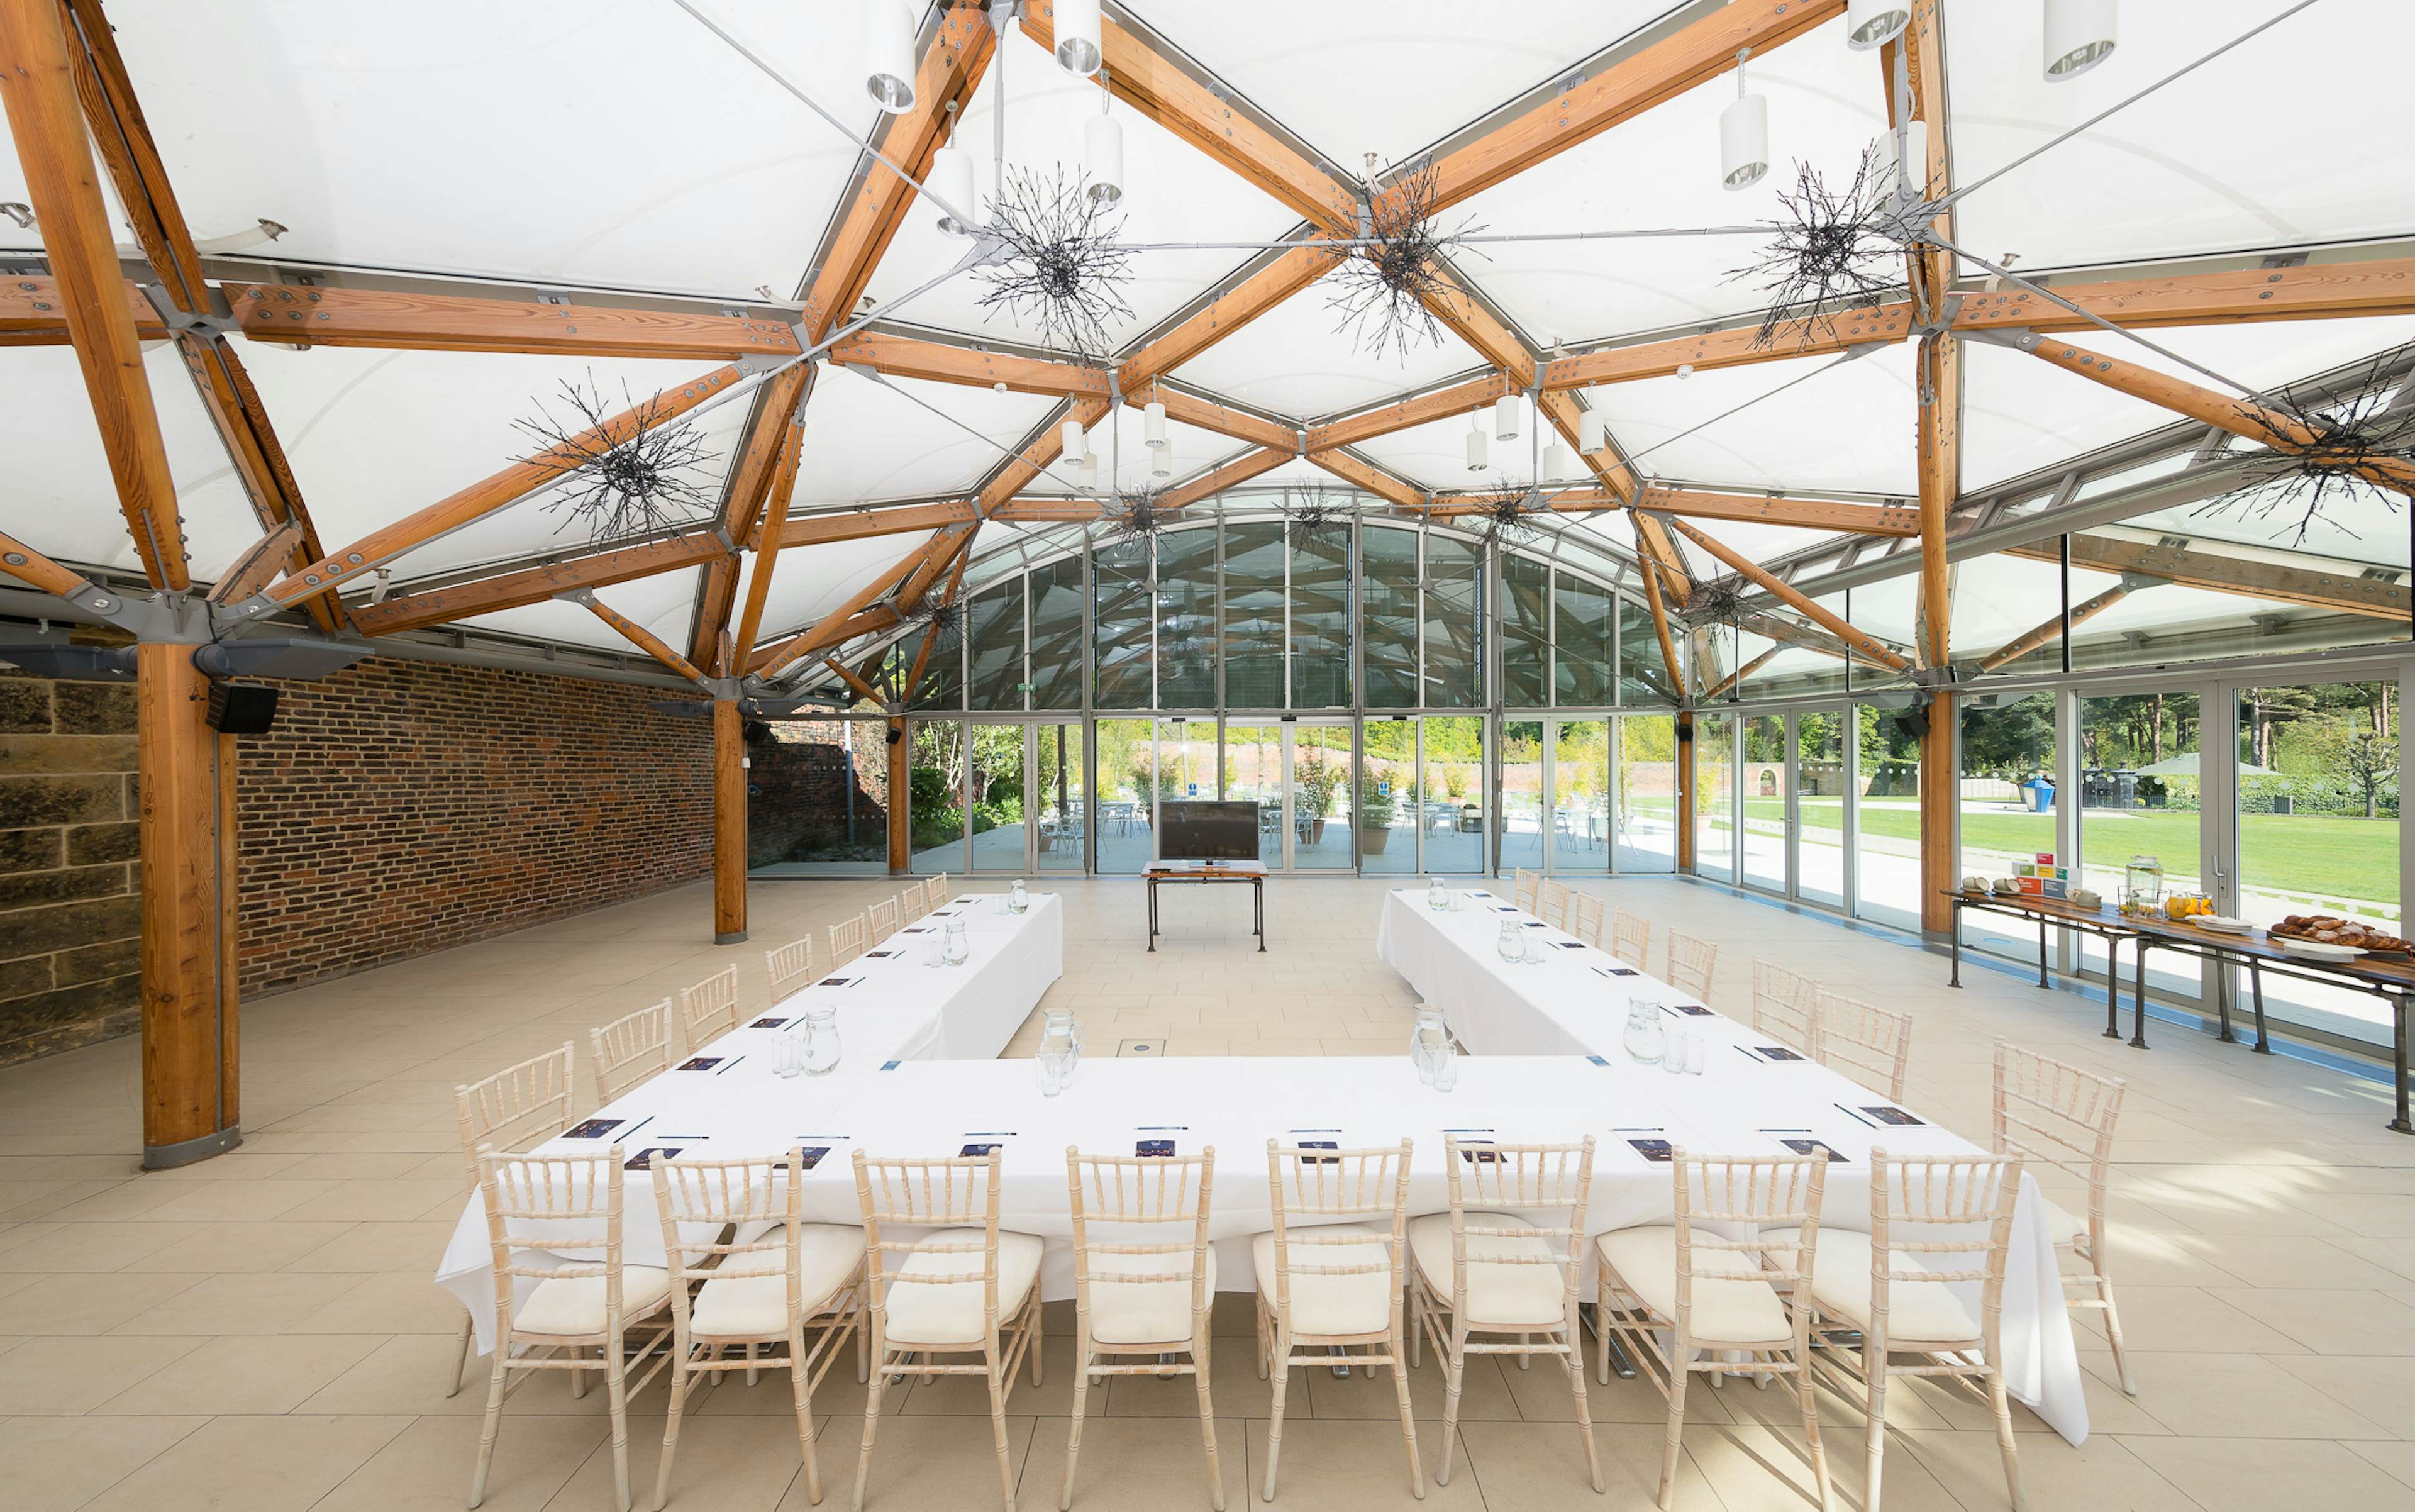 The Pavilion at The Alnwick Garden  - The Pavilion Room image 1